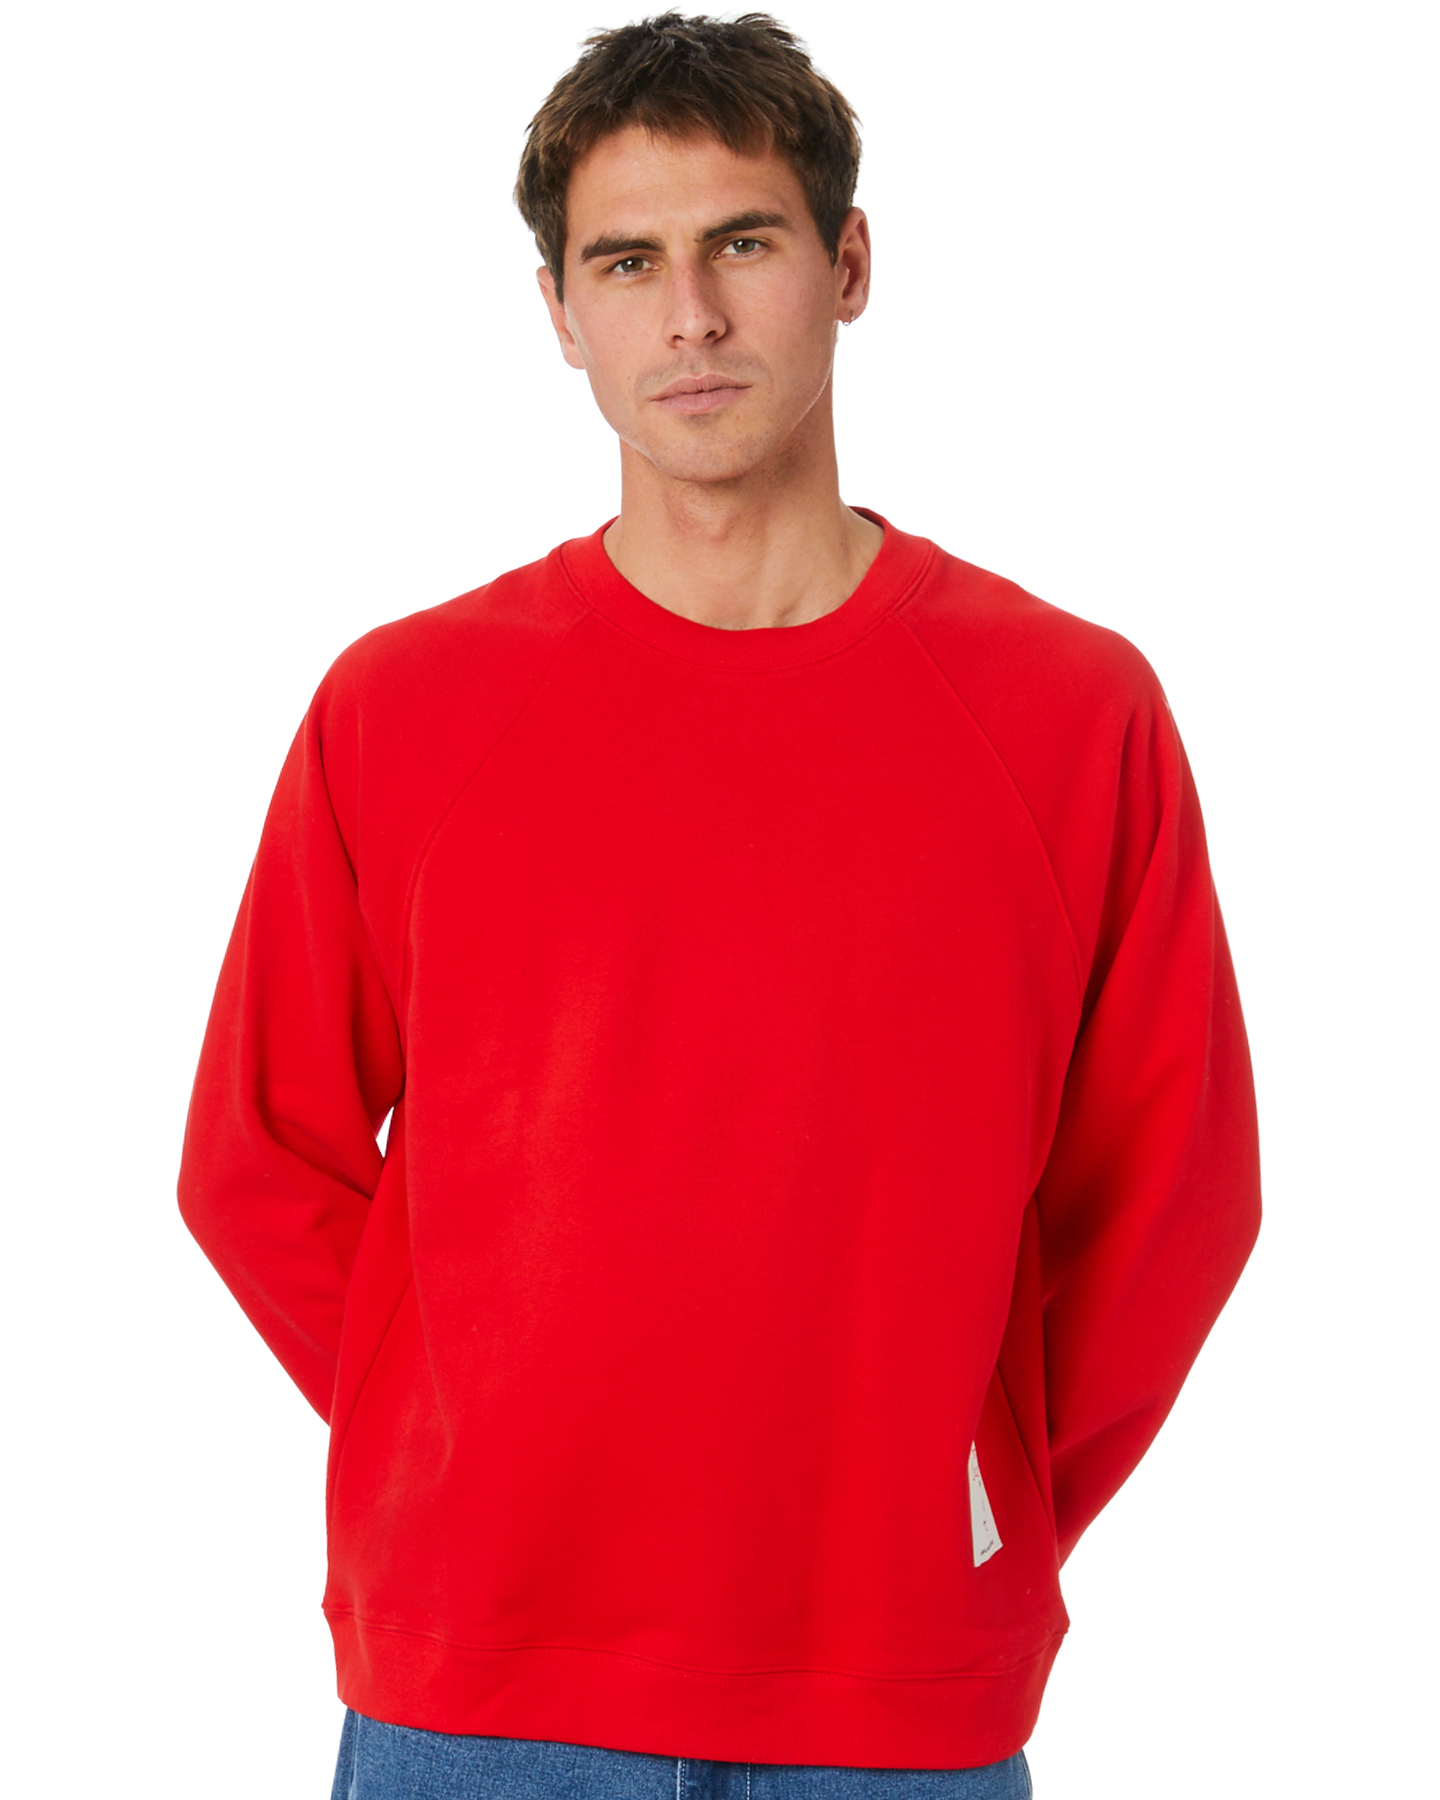 Misfit Giant Ornament Mens Crew - Poppy Red | SurfStitch